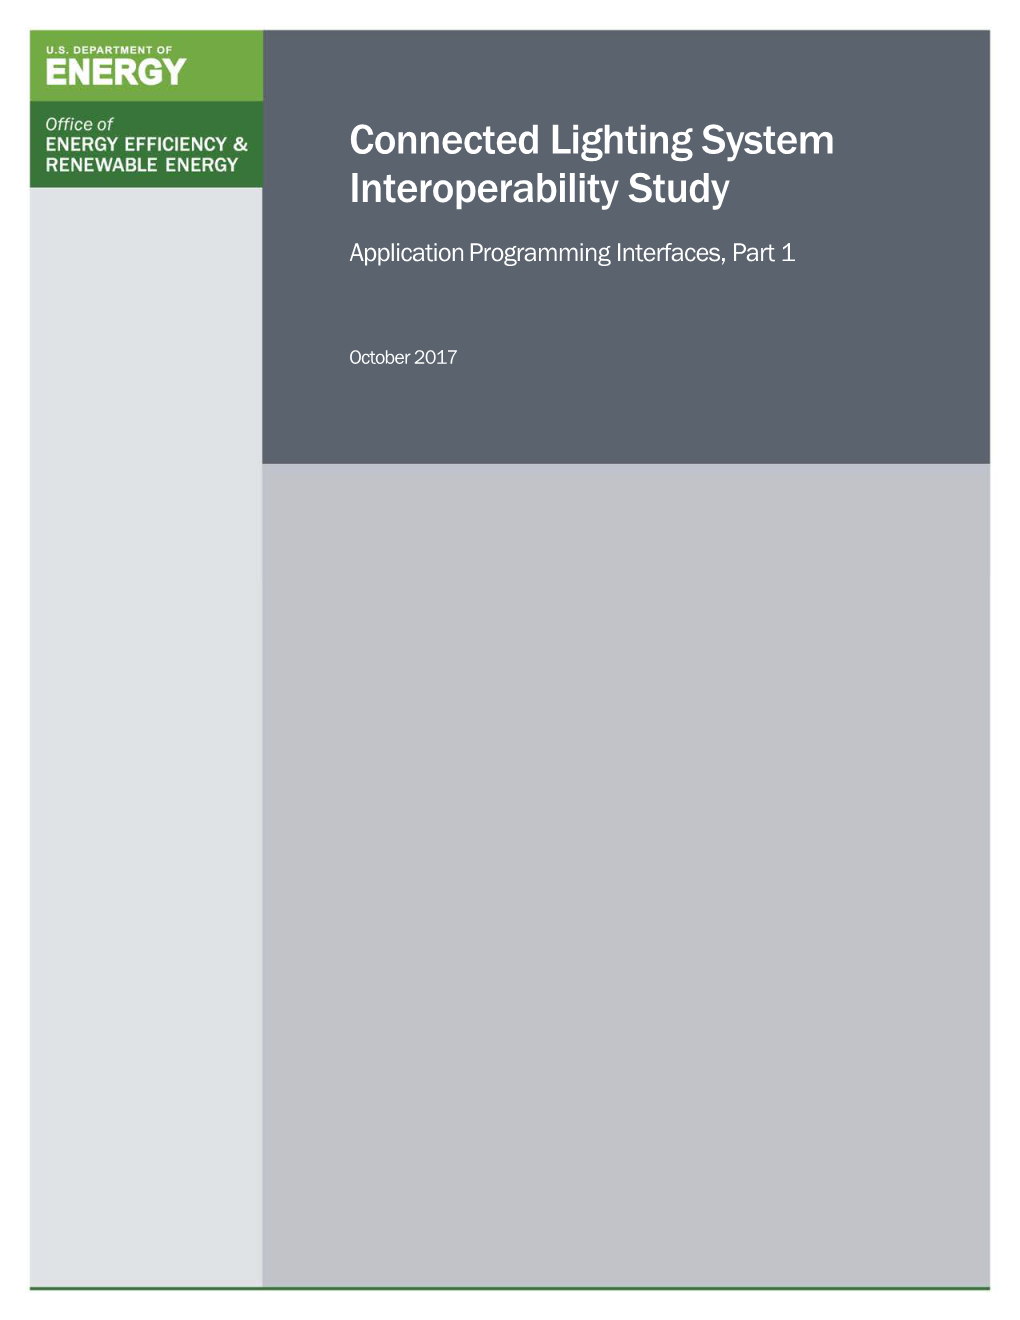 CLS Interoperability Study: Application Programming Interfaces, Part 1